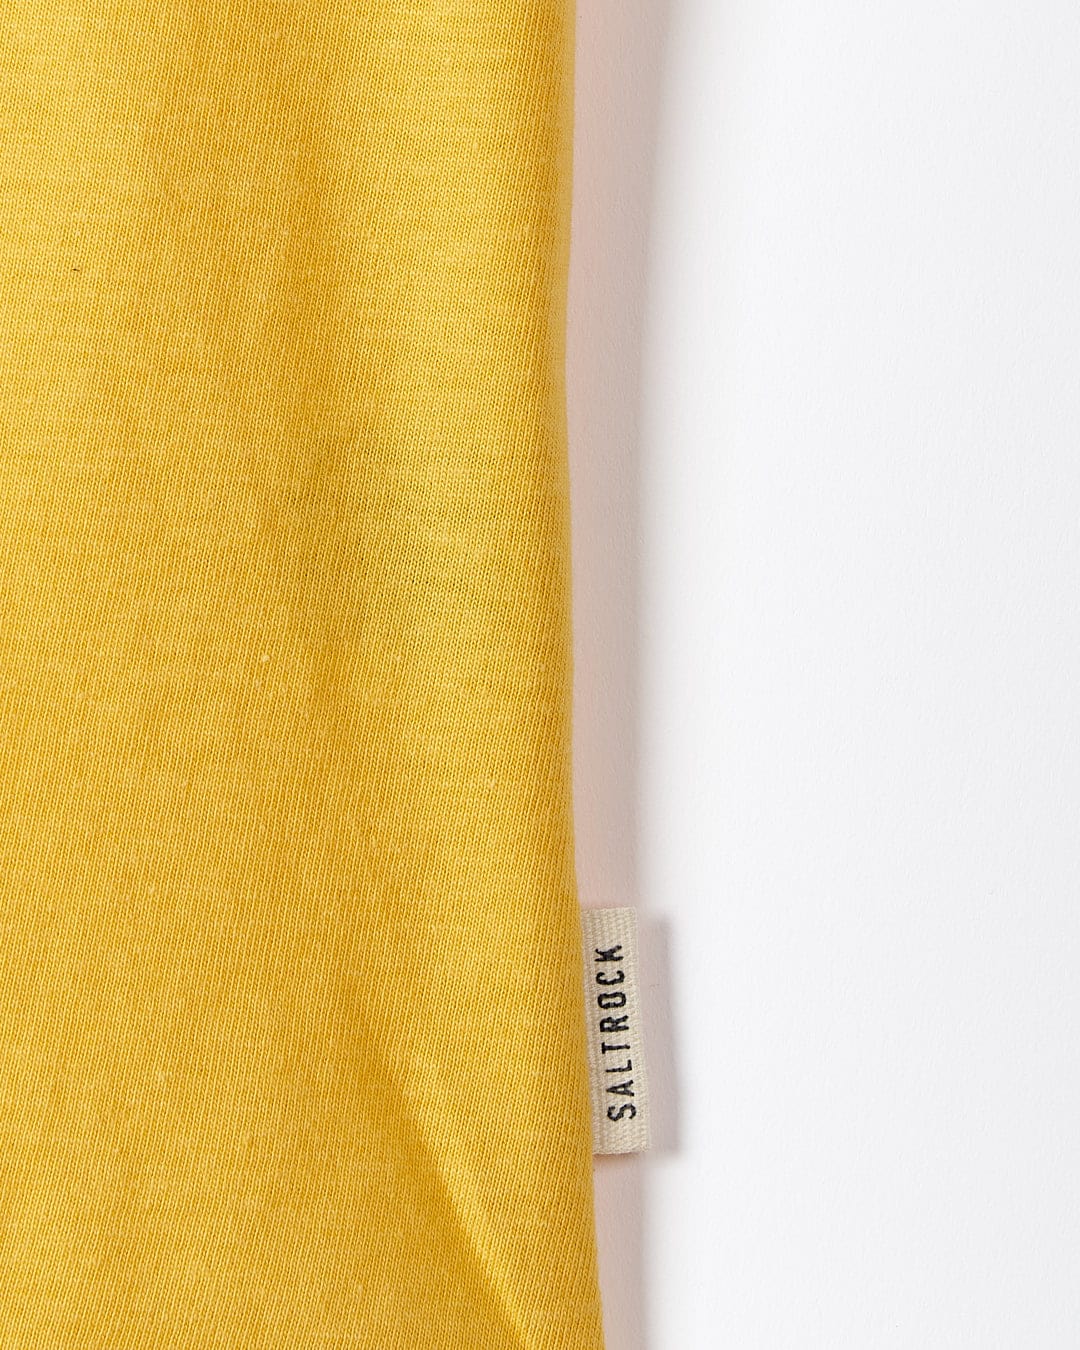 A Saltrock yellow t-shirt with the On The Road Wales - Womens Short Sleeve T-Shirt - Yellow label on it.